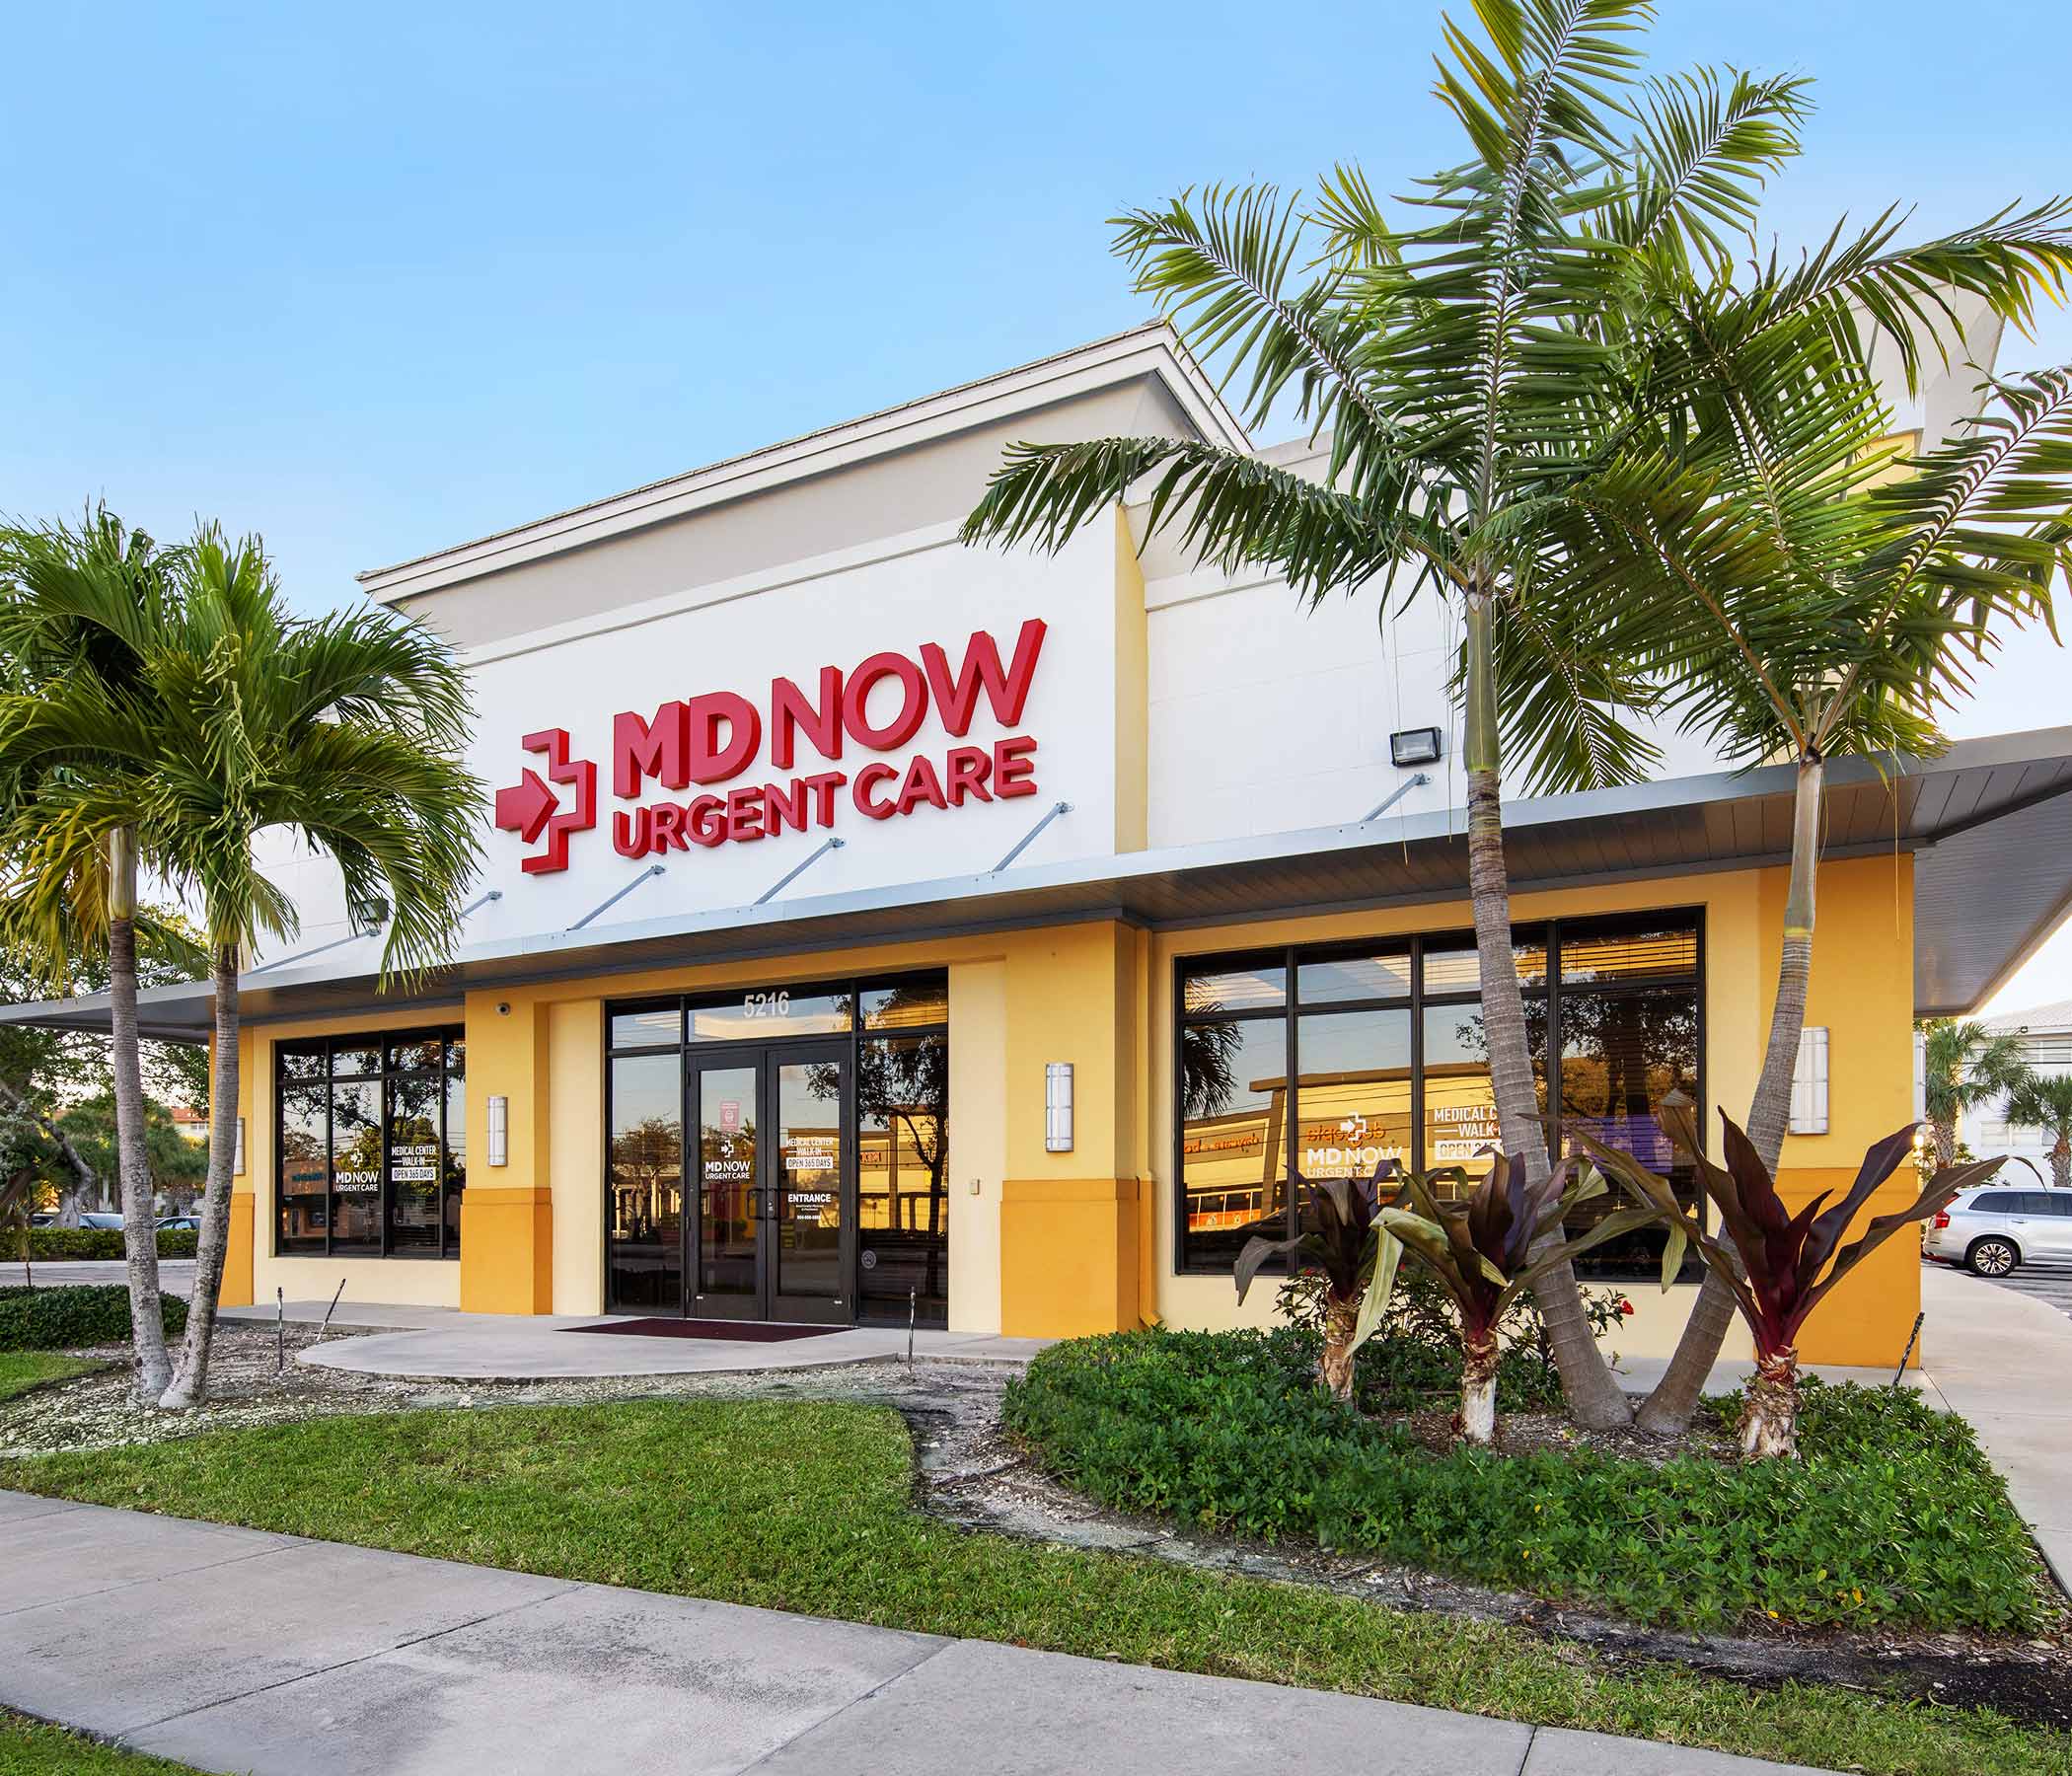 Located near the intersection of North Federal Highway and NE 54th Ct. near the Courtyard by Marriott Fort Lauderdale East/Lauderdale-by-the-Sea